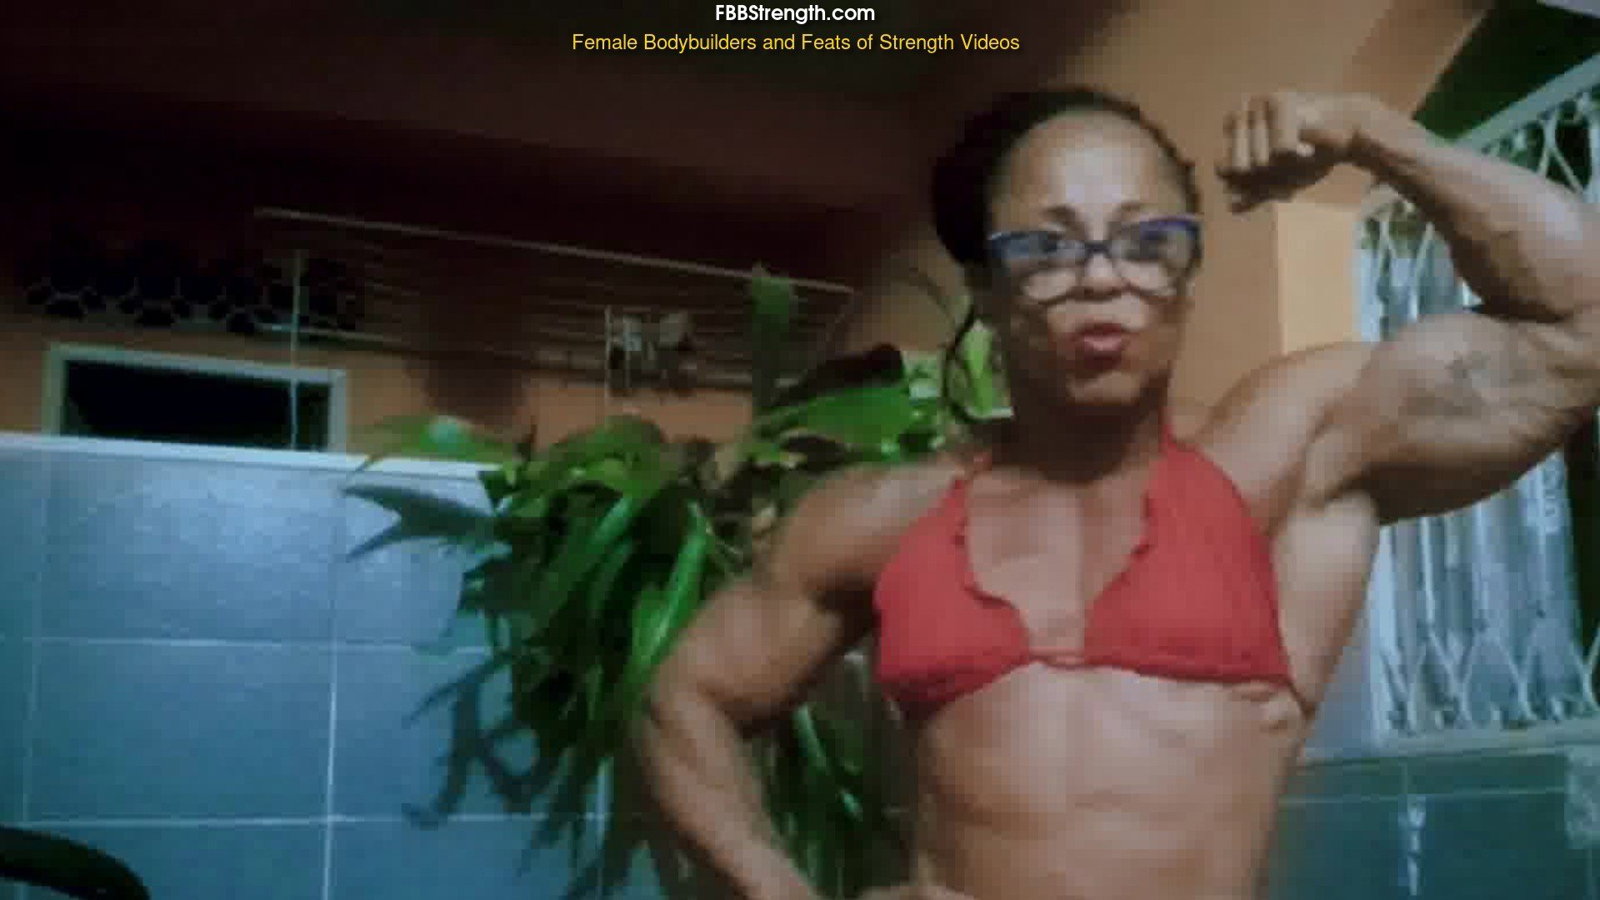 Photo by MusclegirlStrength with the username @MusclegirlStrength, who is a brand user,  April 6, 2024 at 1:09 AM and the text says 'Watch Marta Strong Crush Metal Rebars with Her Insane Strength!: fbbstrength.com

#musclegirl #musclegirllove #femalemuscle #femalemuscles #featsofstrength #StrongWomen #MusclePower #BarBendingQueens'